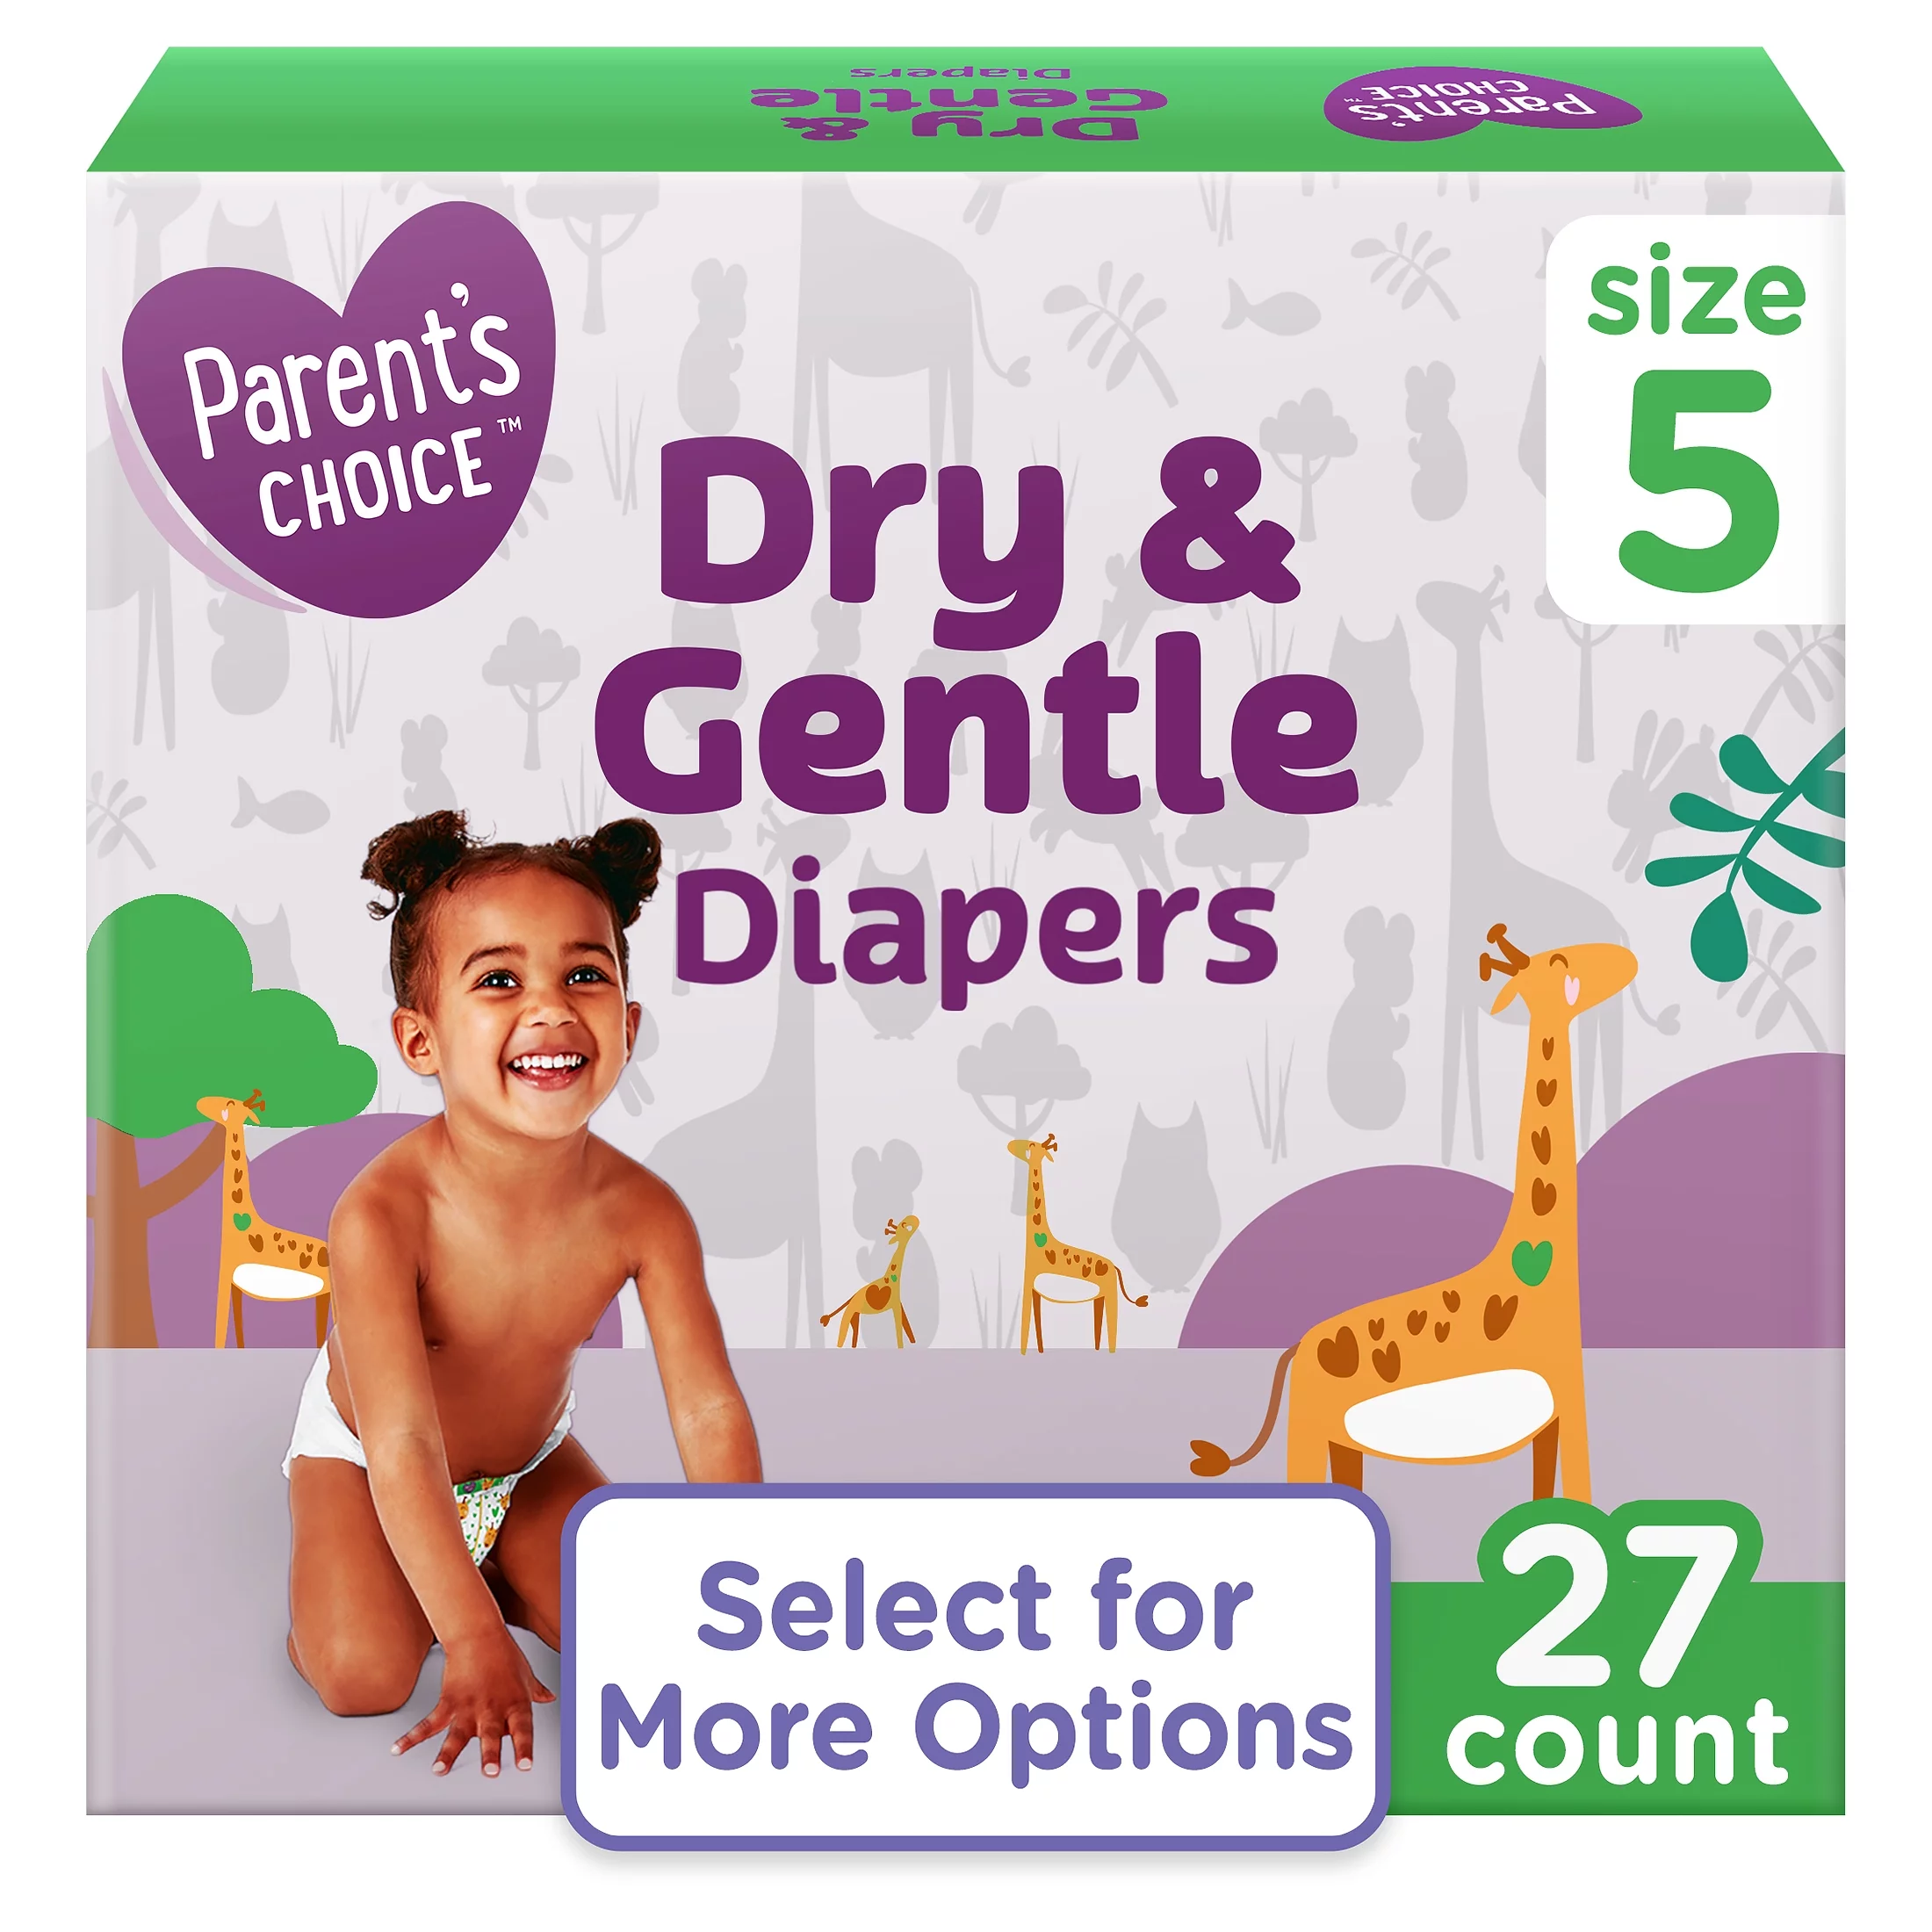 Parent's Choice Dry & Gentle Diapers Size 5, 27 Count (Select for More Options)